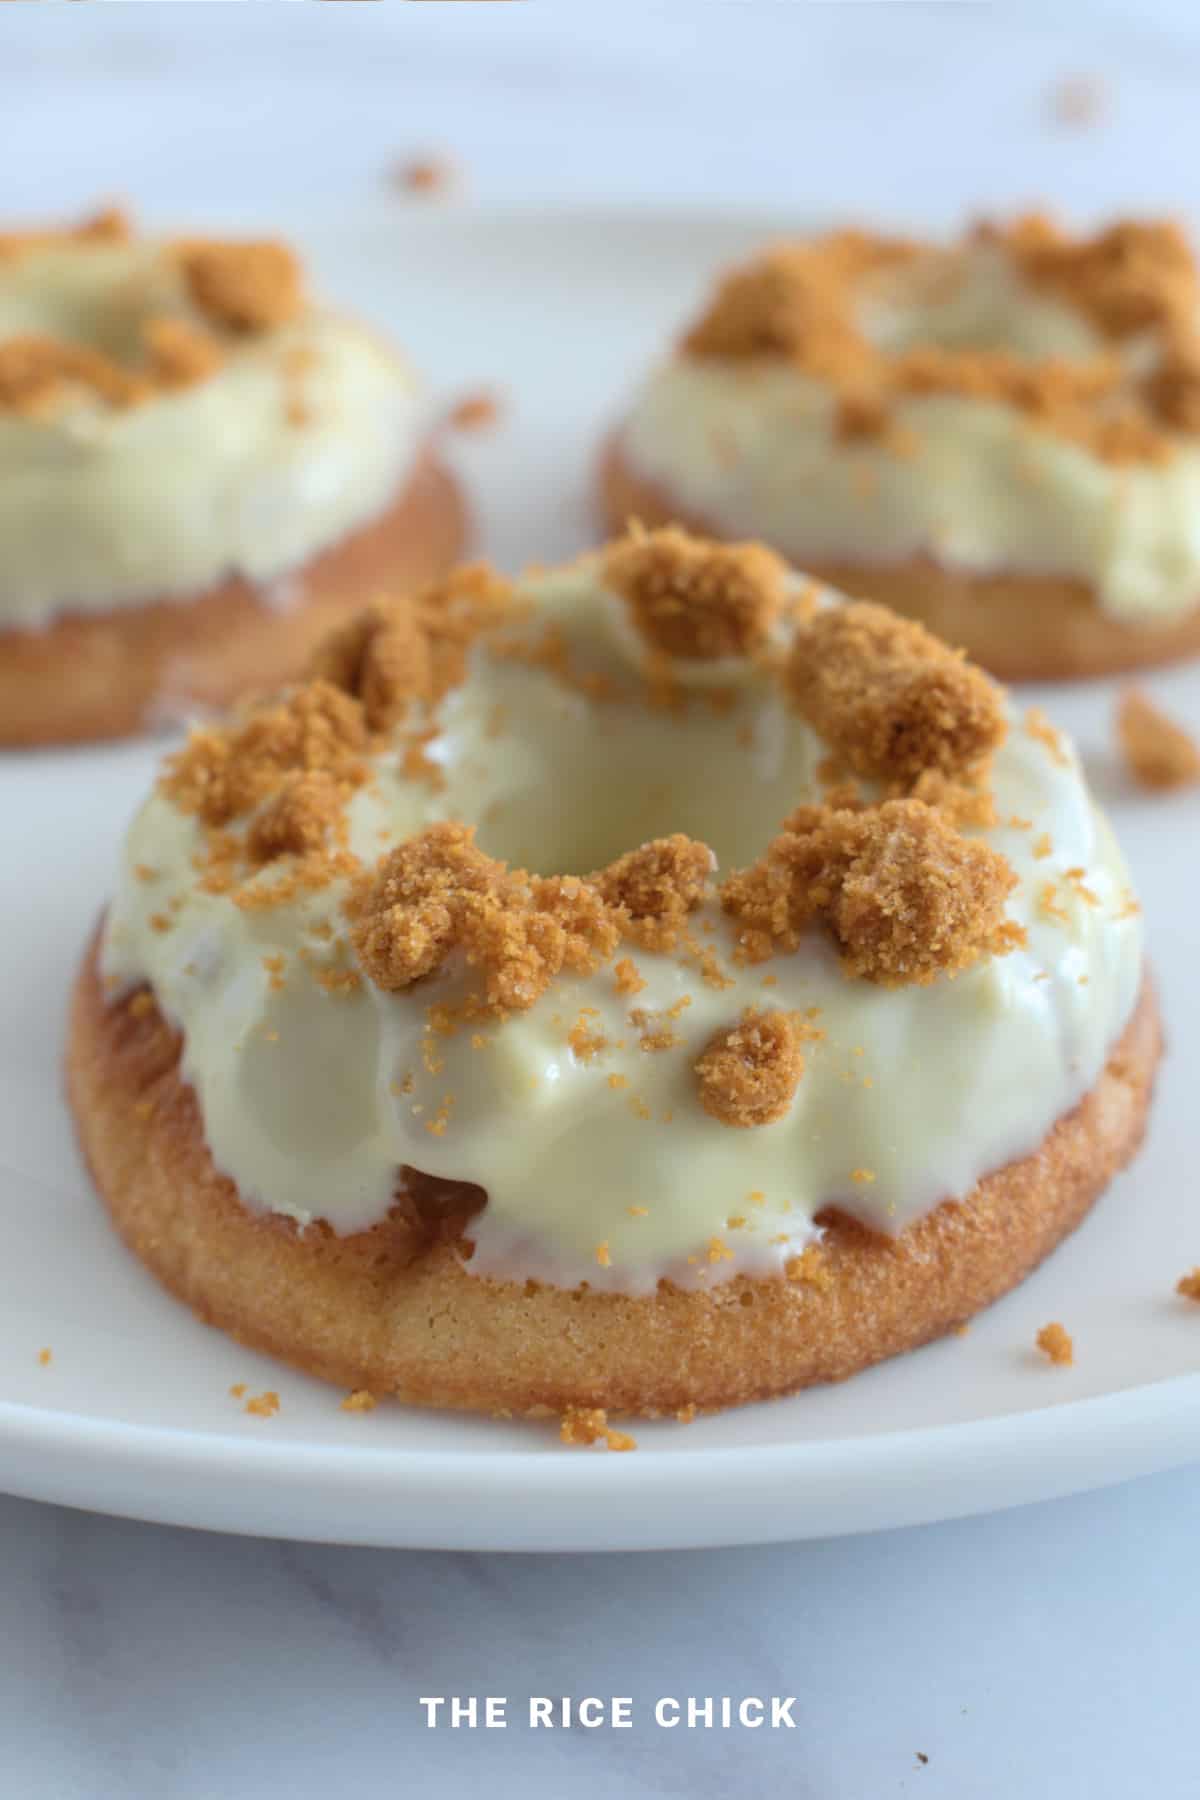 Chocolate glazed baked mochi donuts topped with crushed biscuits on a white plate.